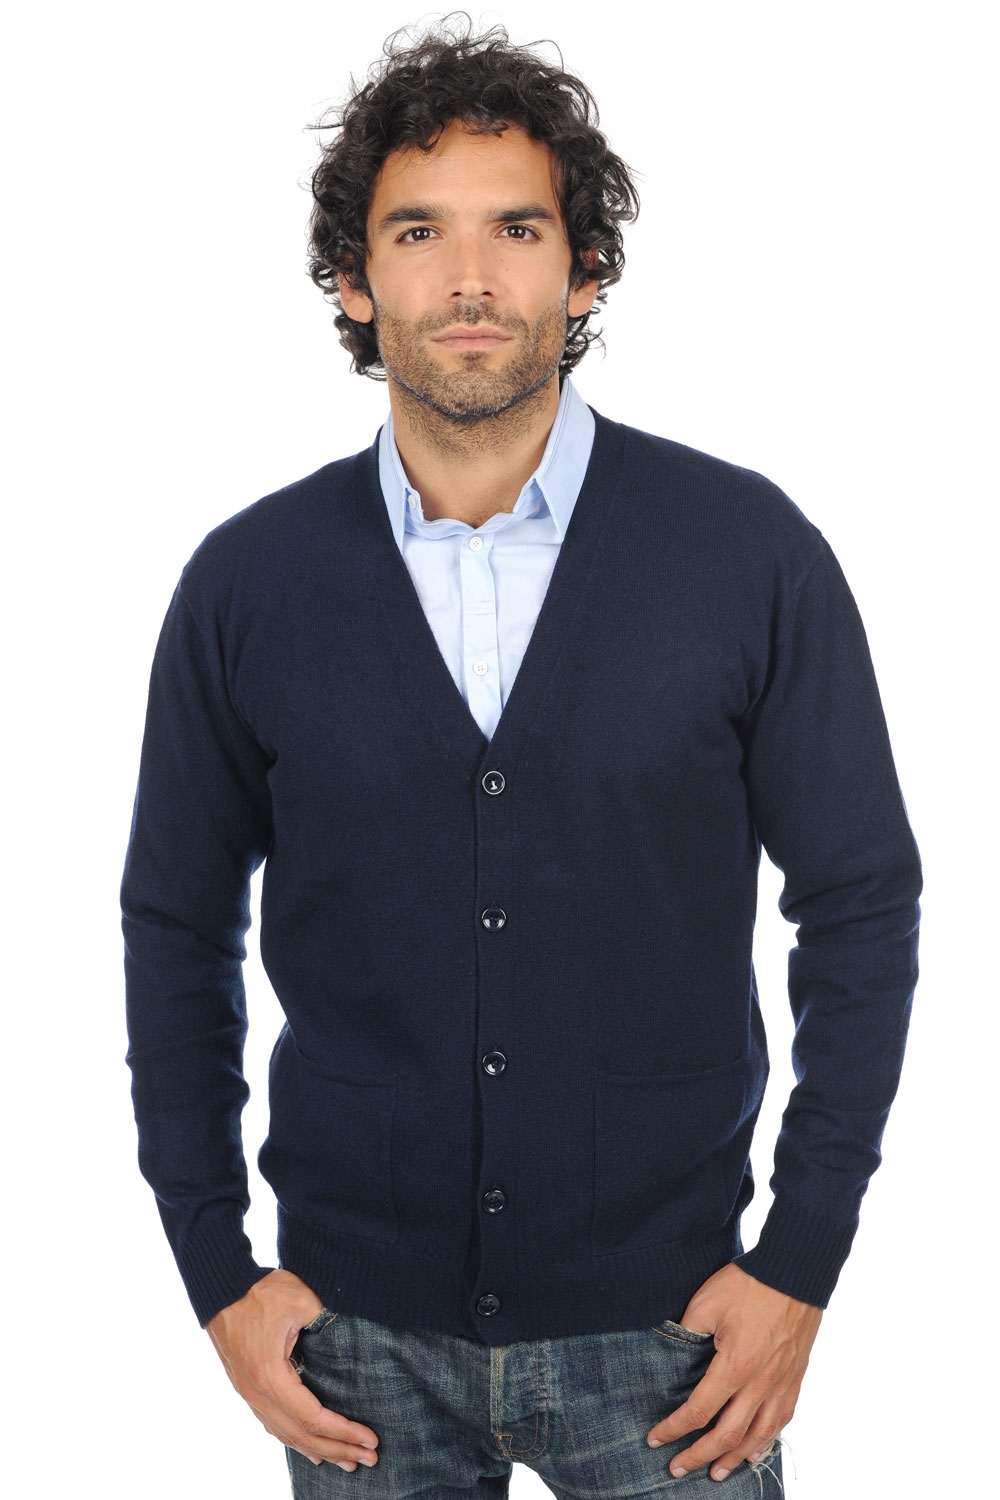 Cachemire pull homme yoni marine fonce l